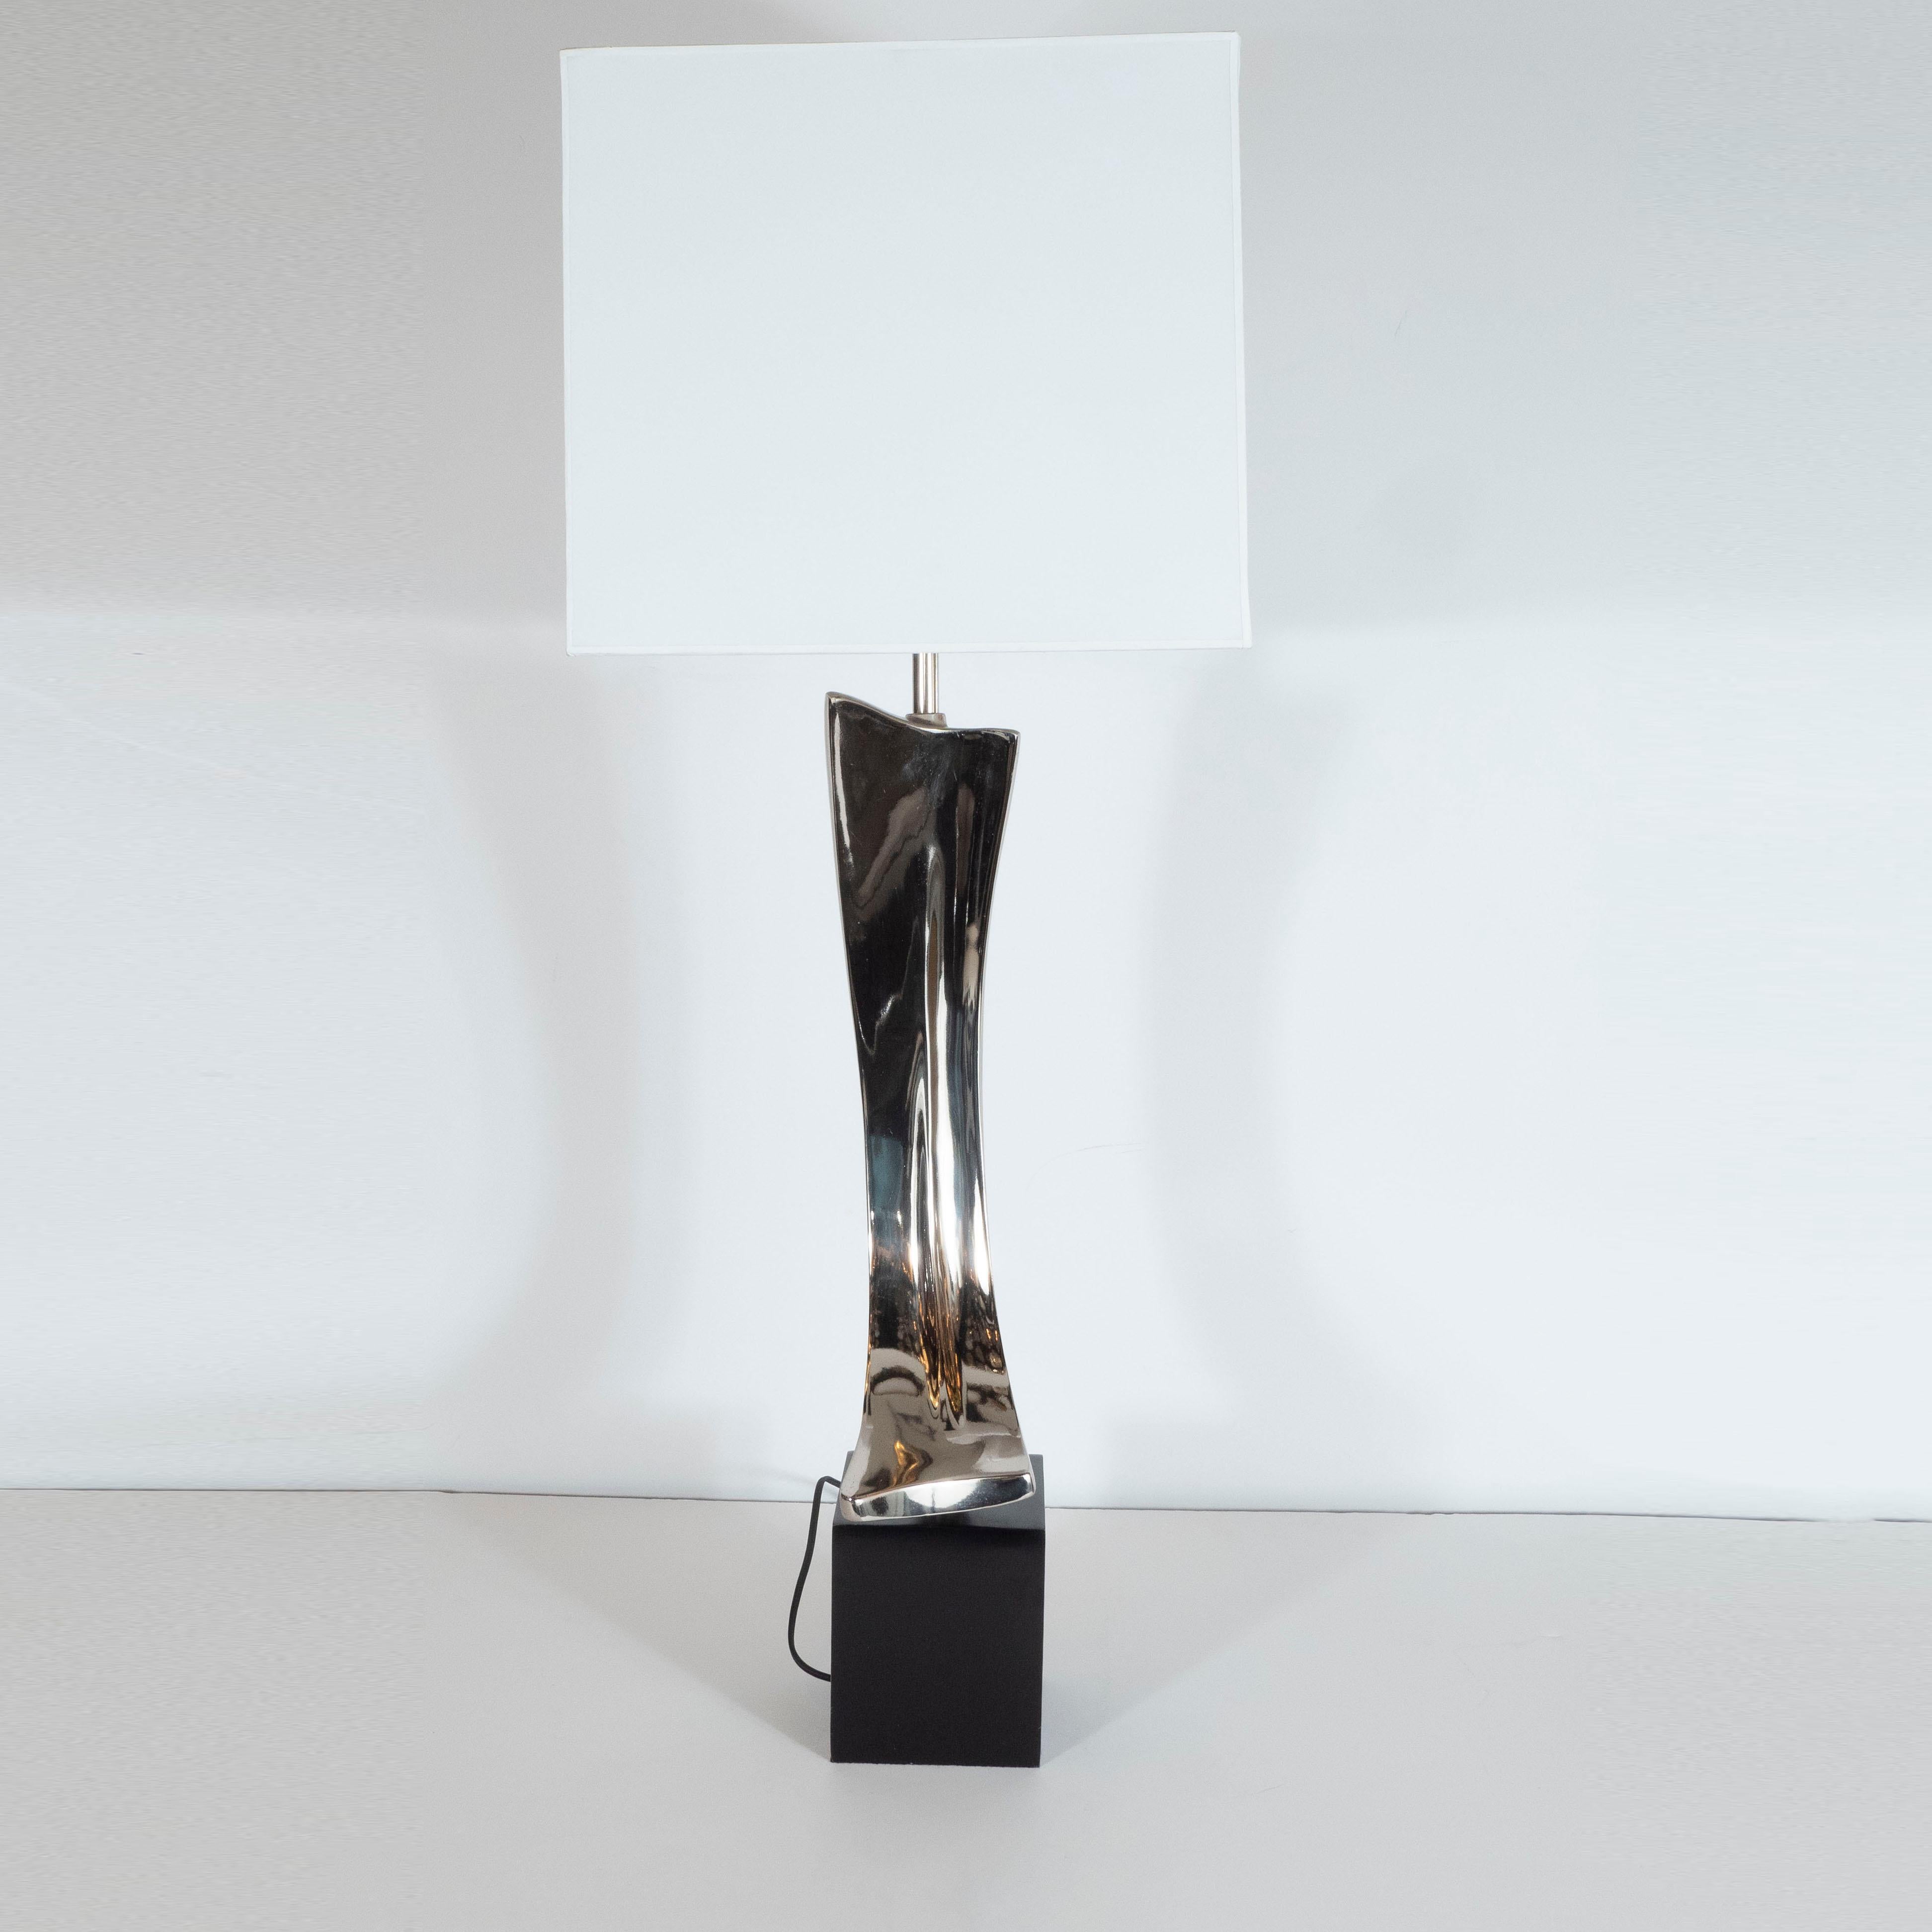 Midcentury Brutalist Table Lamp by Weiss & Barr for Laurel Lamp Co. In Excellent Condition For Sale In New York, NY